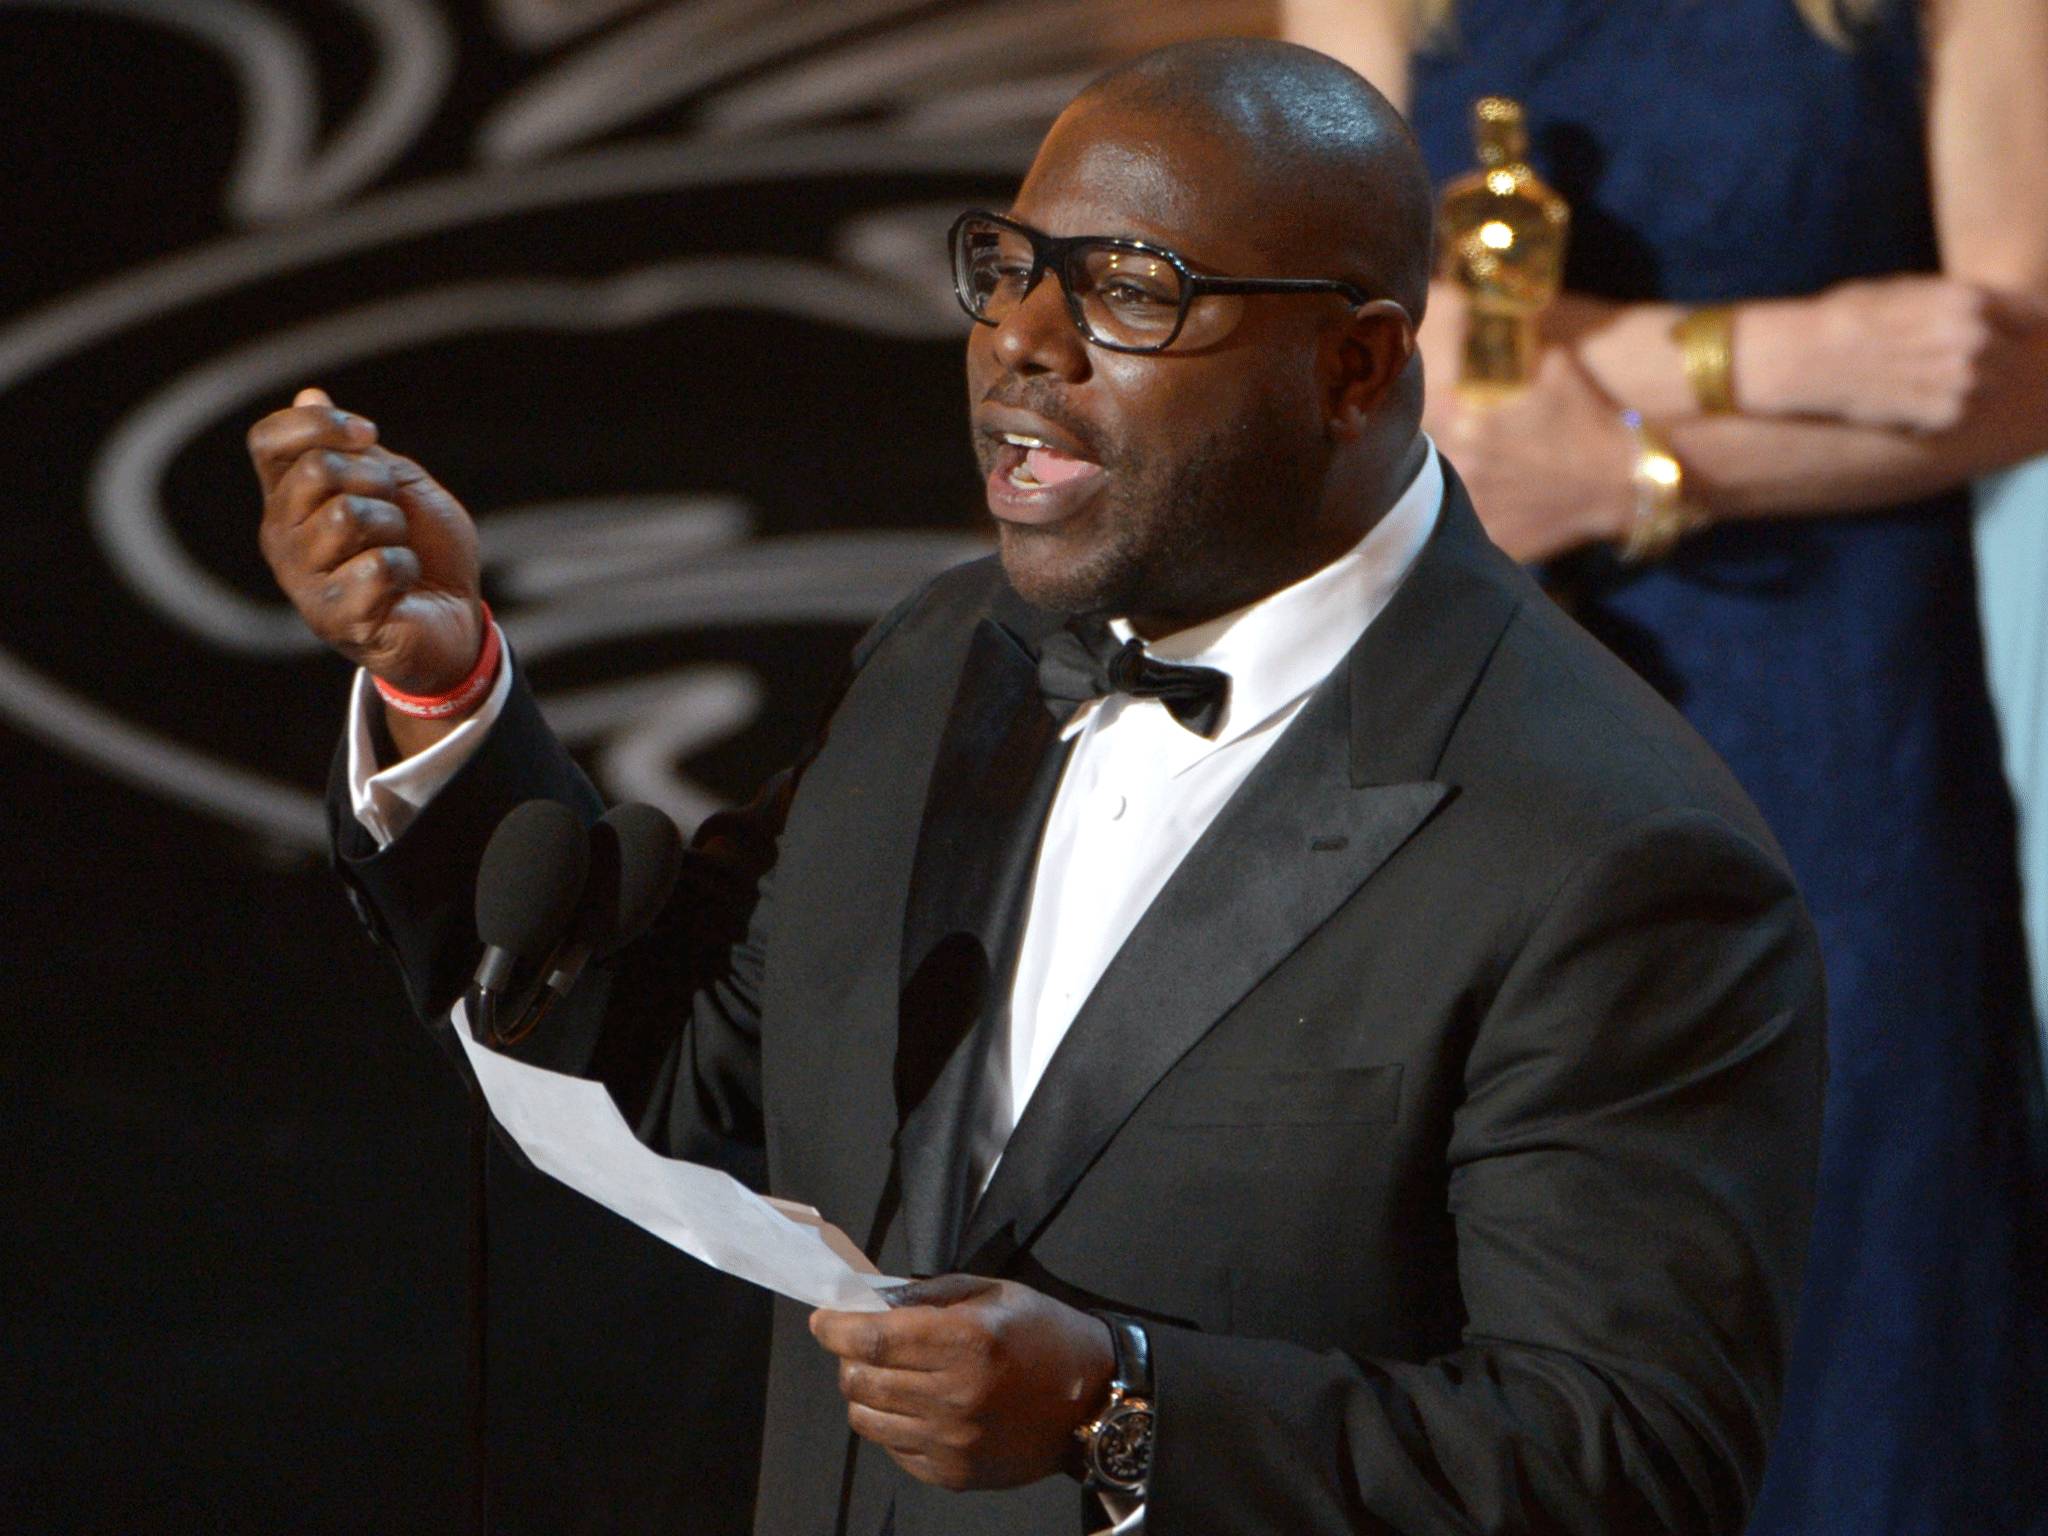 Steve McQueen dedicated the Oscar to those who endured slavery